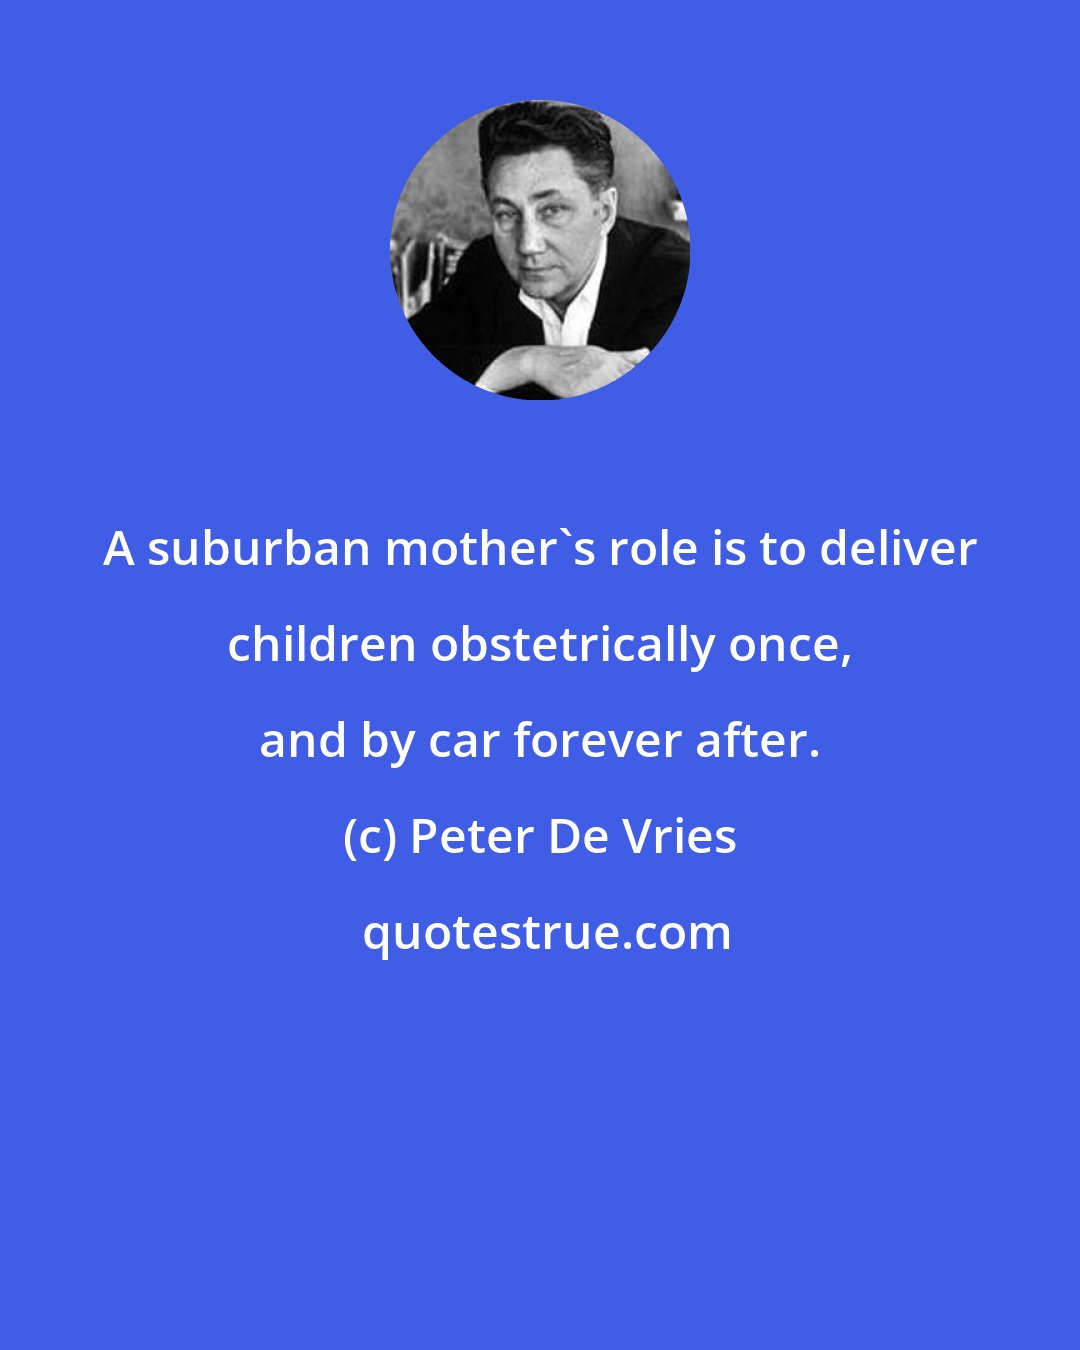 Peter De Vries: A suburban mother's role is to deliver children obstetrically once, and by car forever after.